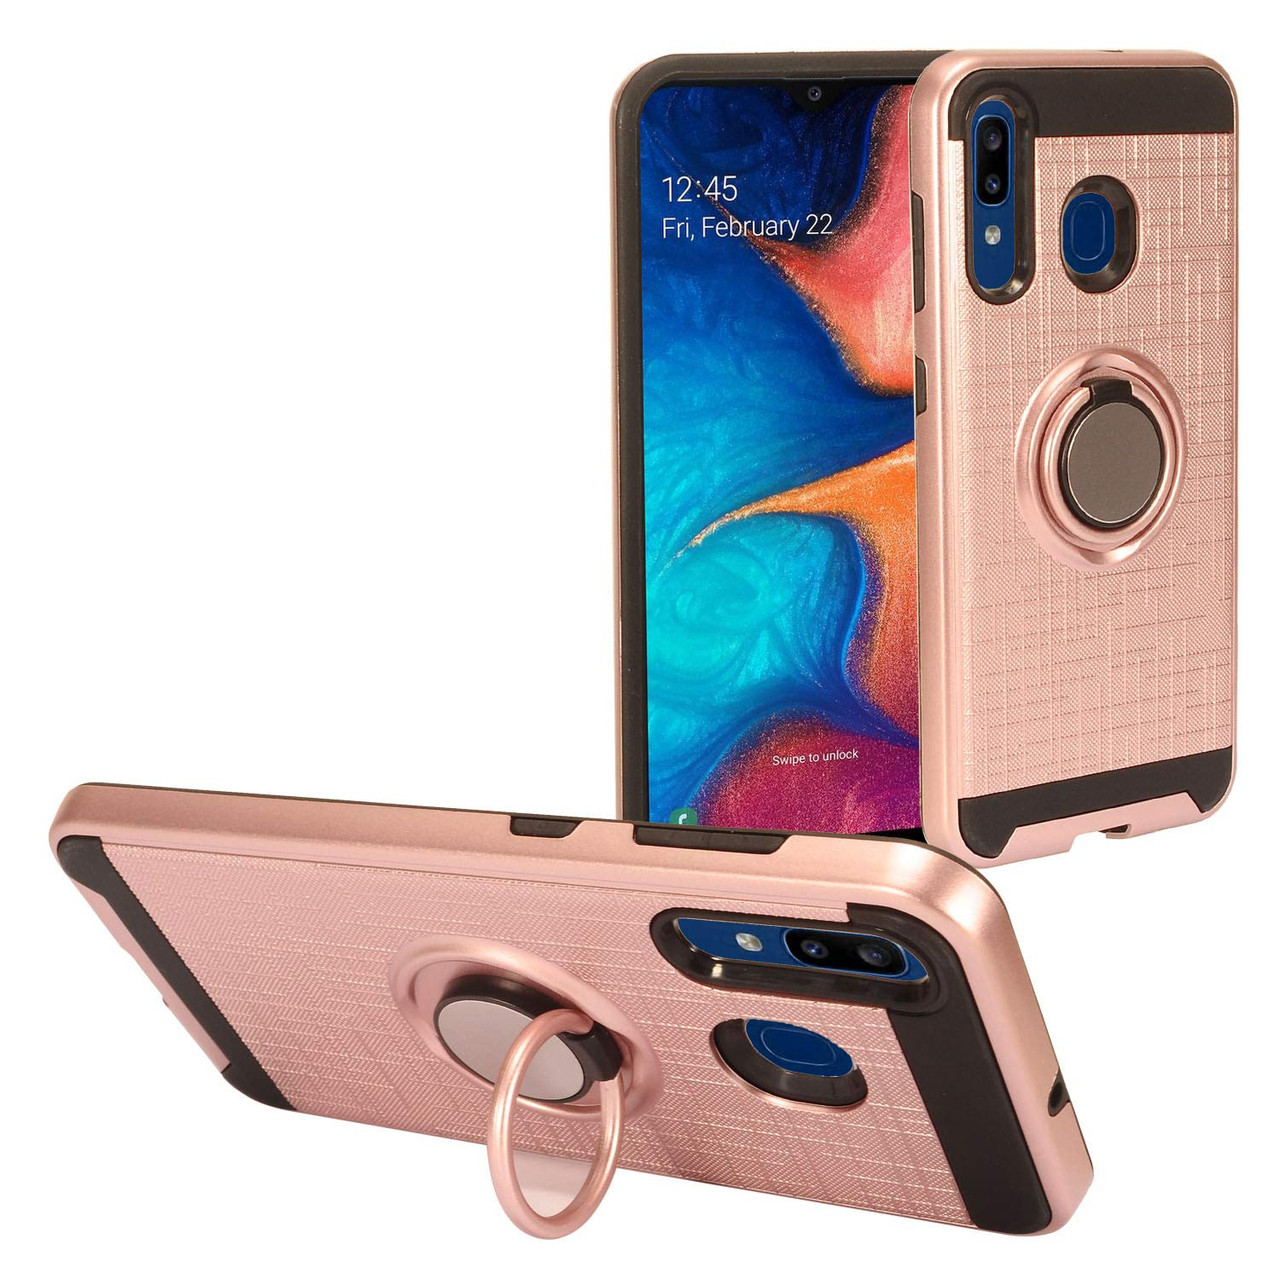 Multifunctional Hybrid Armor Case with Smart Loop Ring Holder for Samsung  Galaxy A50 / A20 - Rose Gold - HD Accessory